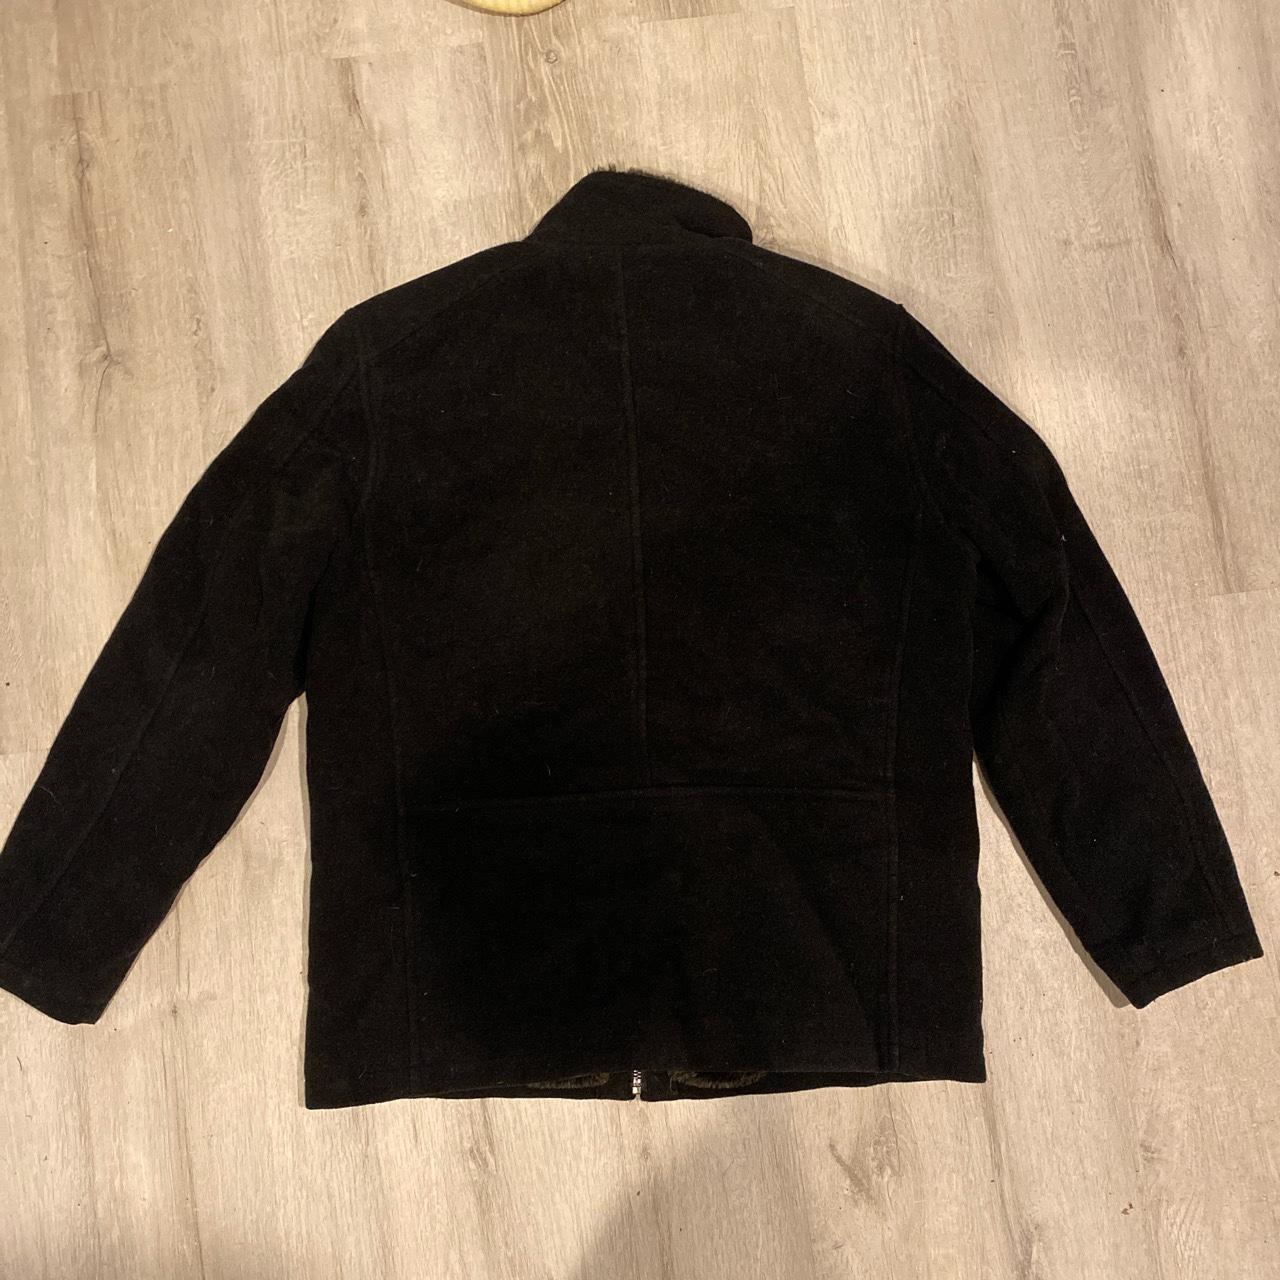 Thick and comfortable, good winter coat - Depop